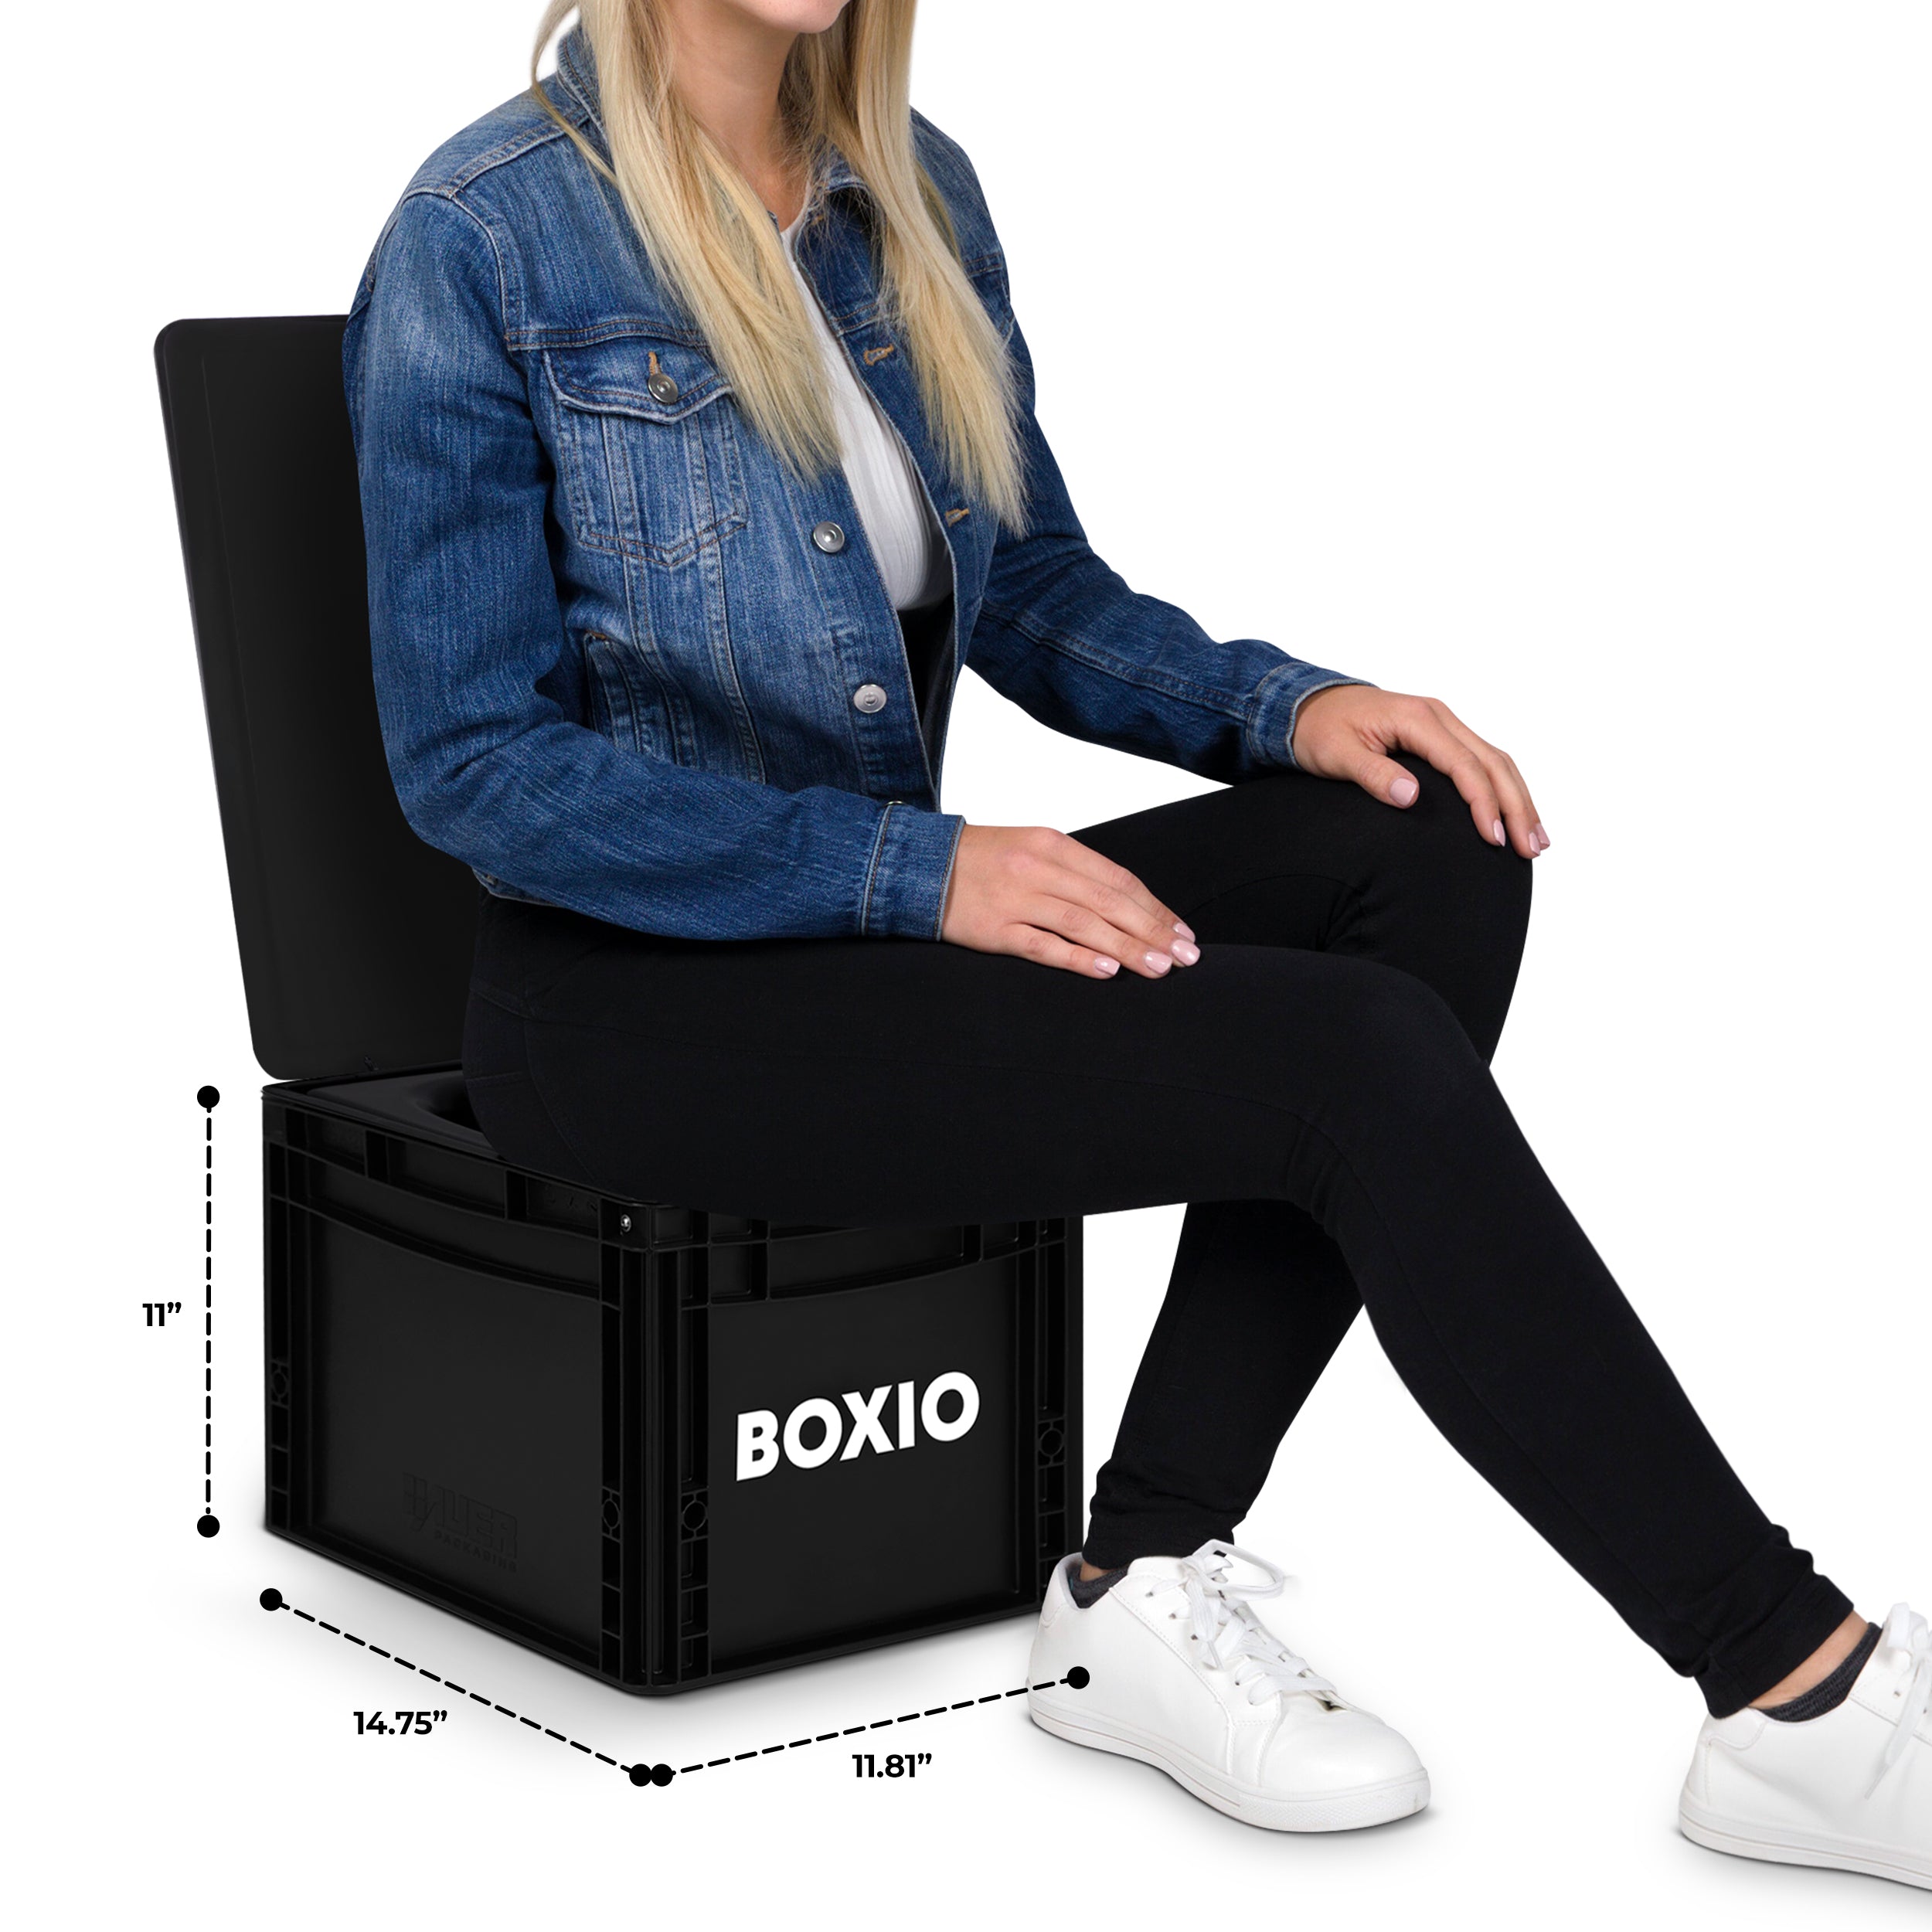  BOXIO Portable Toilet - Convenient Camping Toilet! Compact,  Safe, and Personal Composting Toilet with Convenient Disposal for Camping,  RVing, Boating, Road Trips and Other Recreational Activities : Sports &  Outdoors